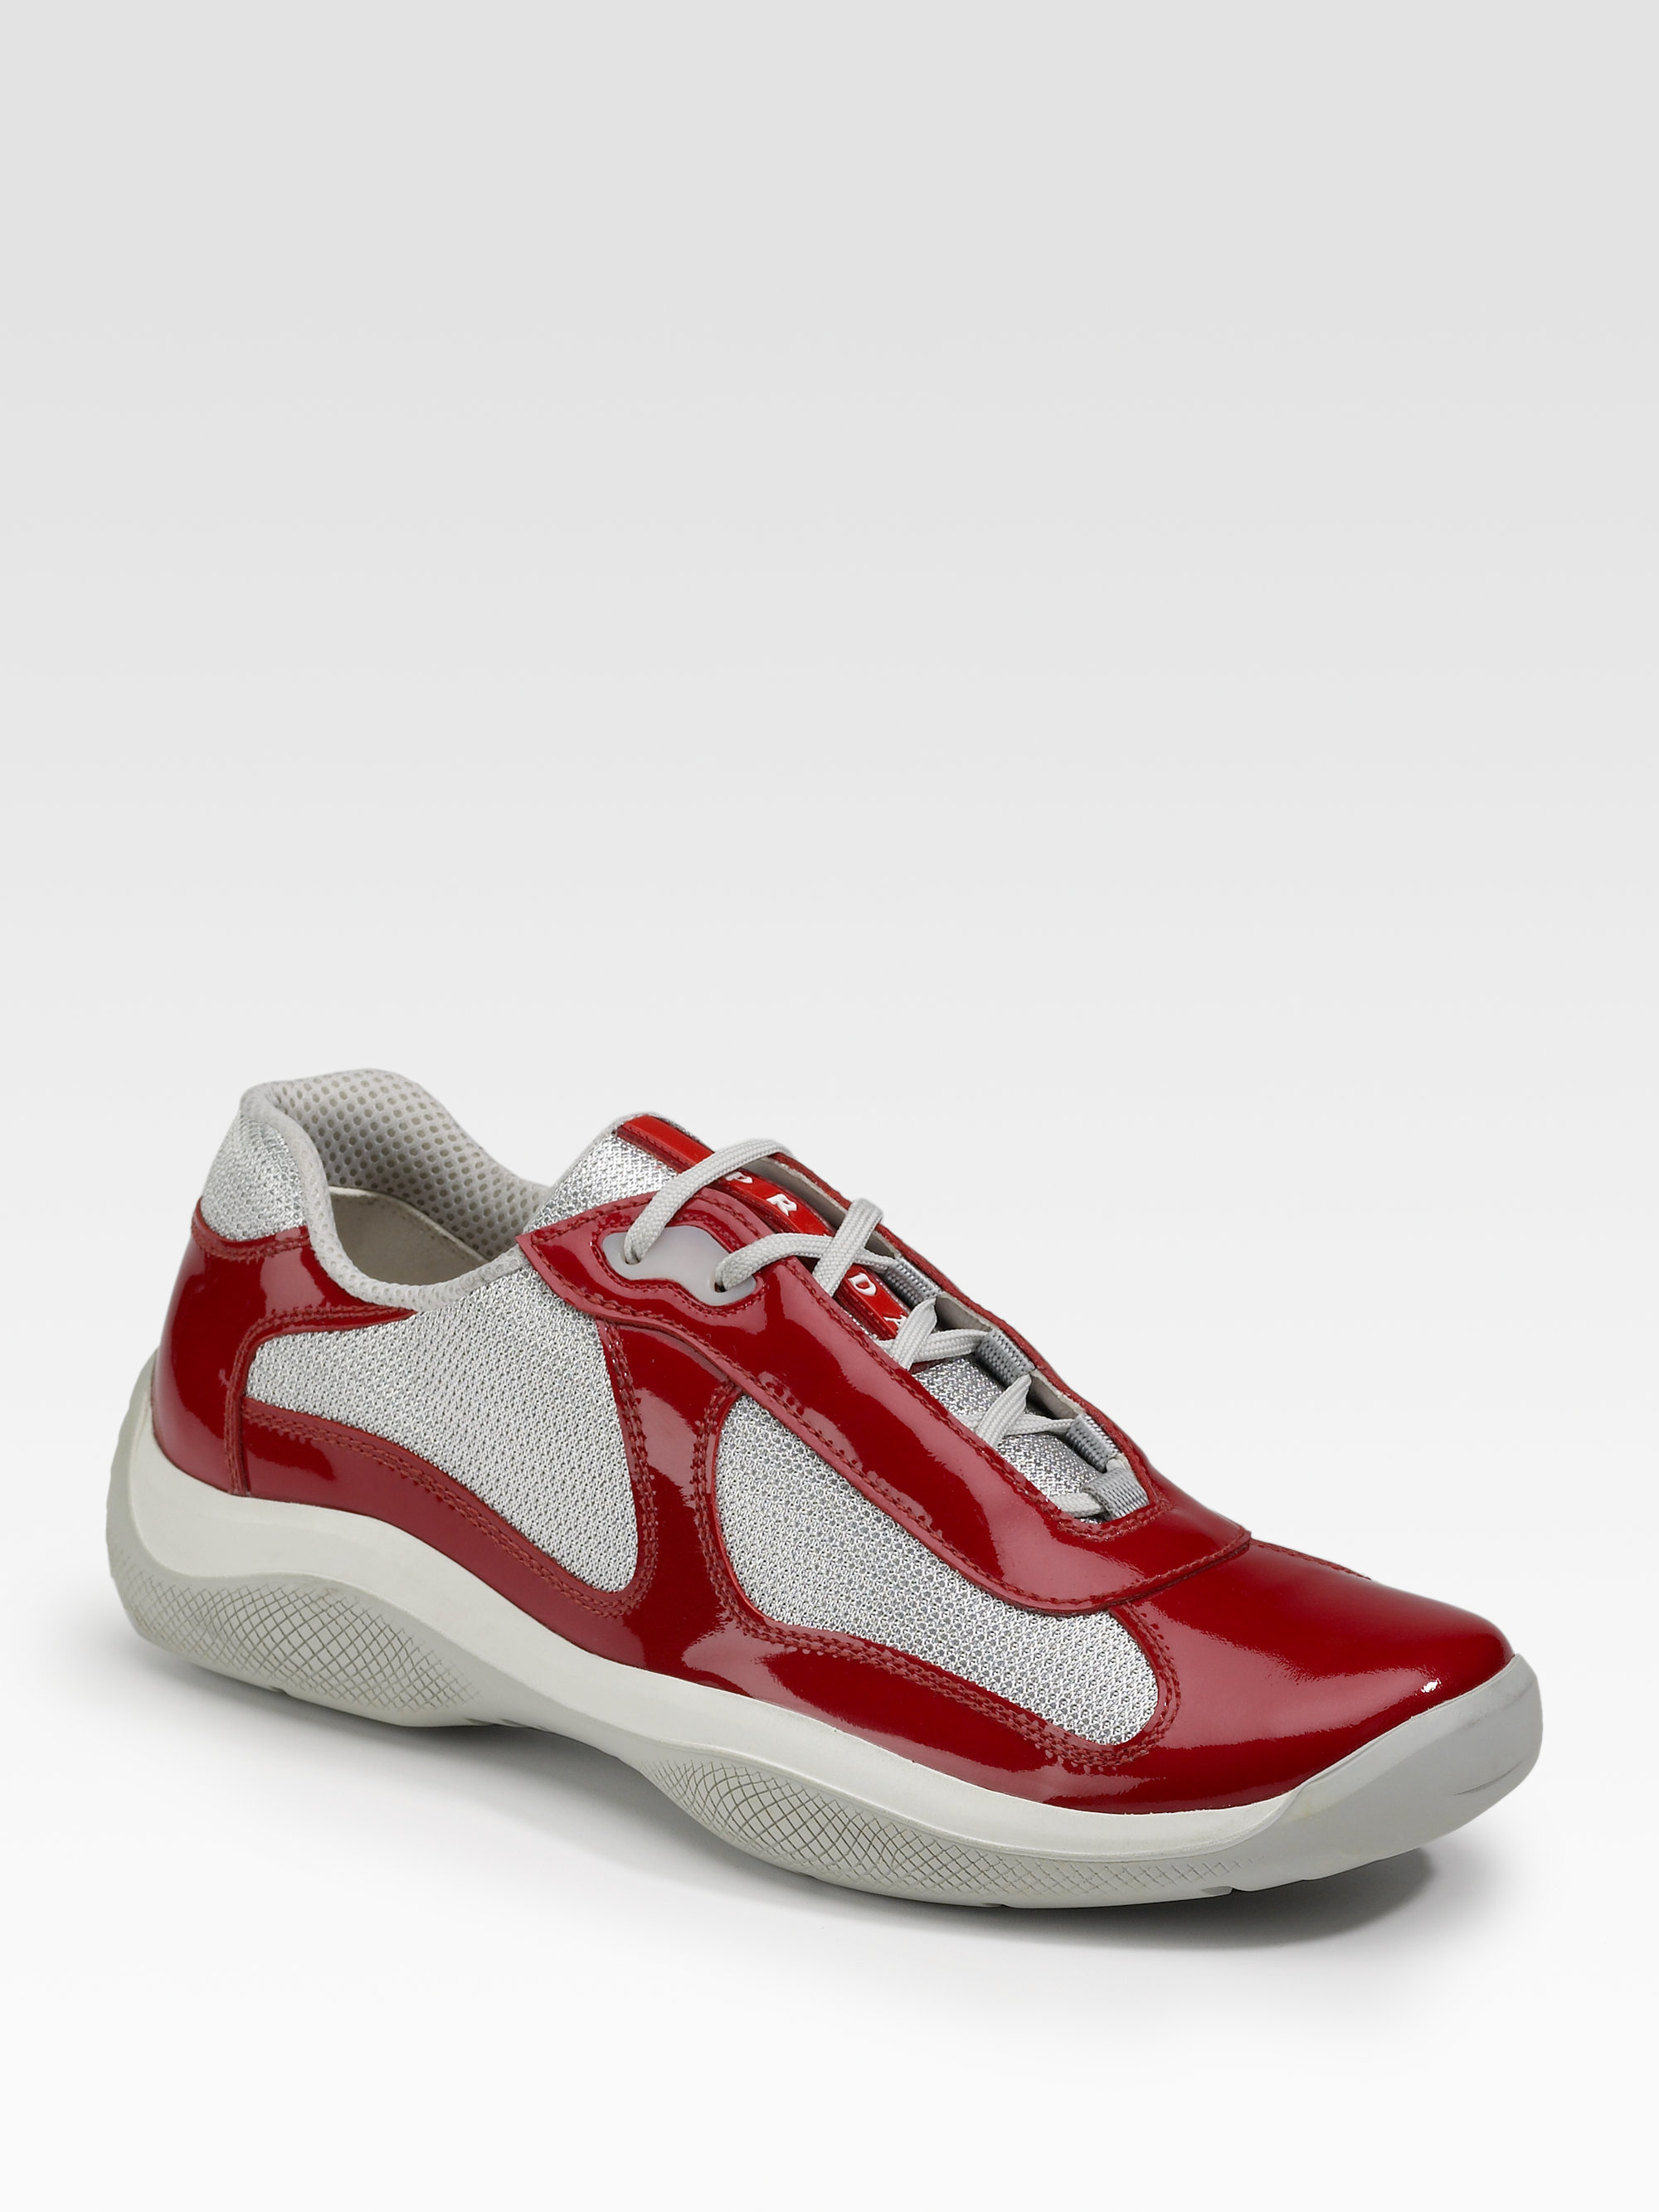 Patent Sneakers in Cherry Red (Red) Men -